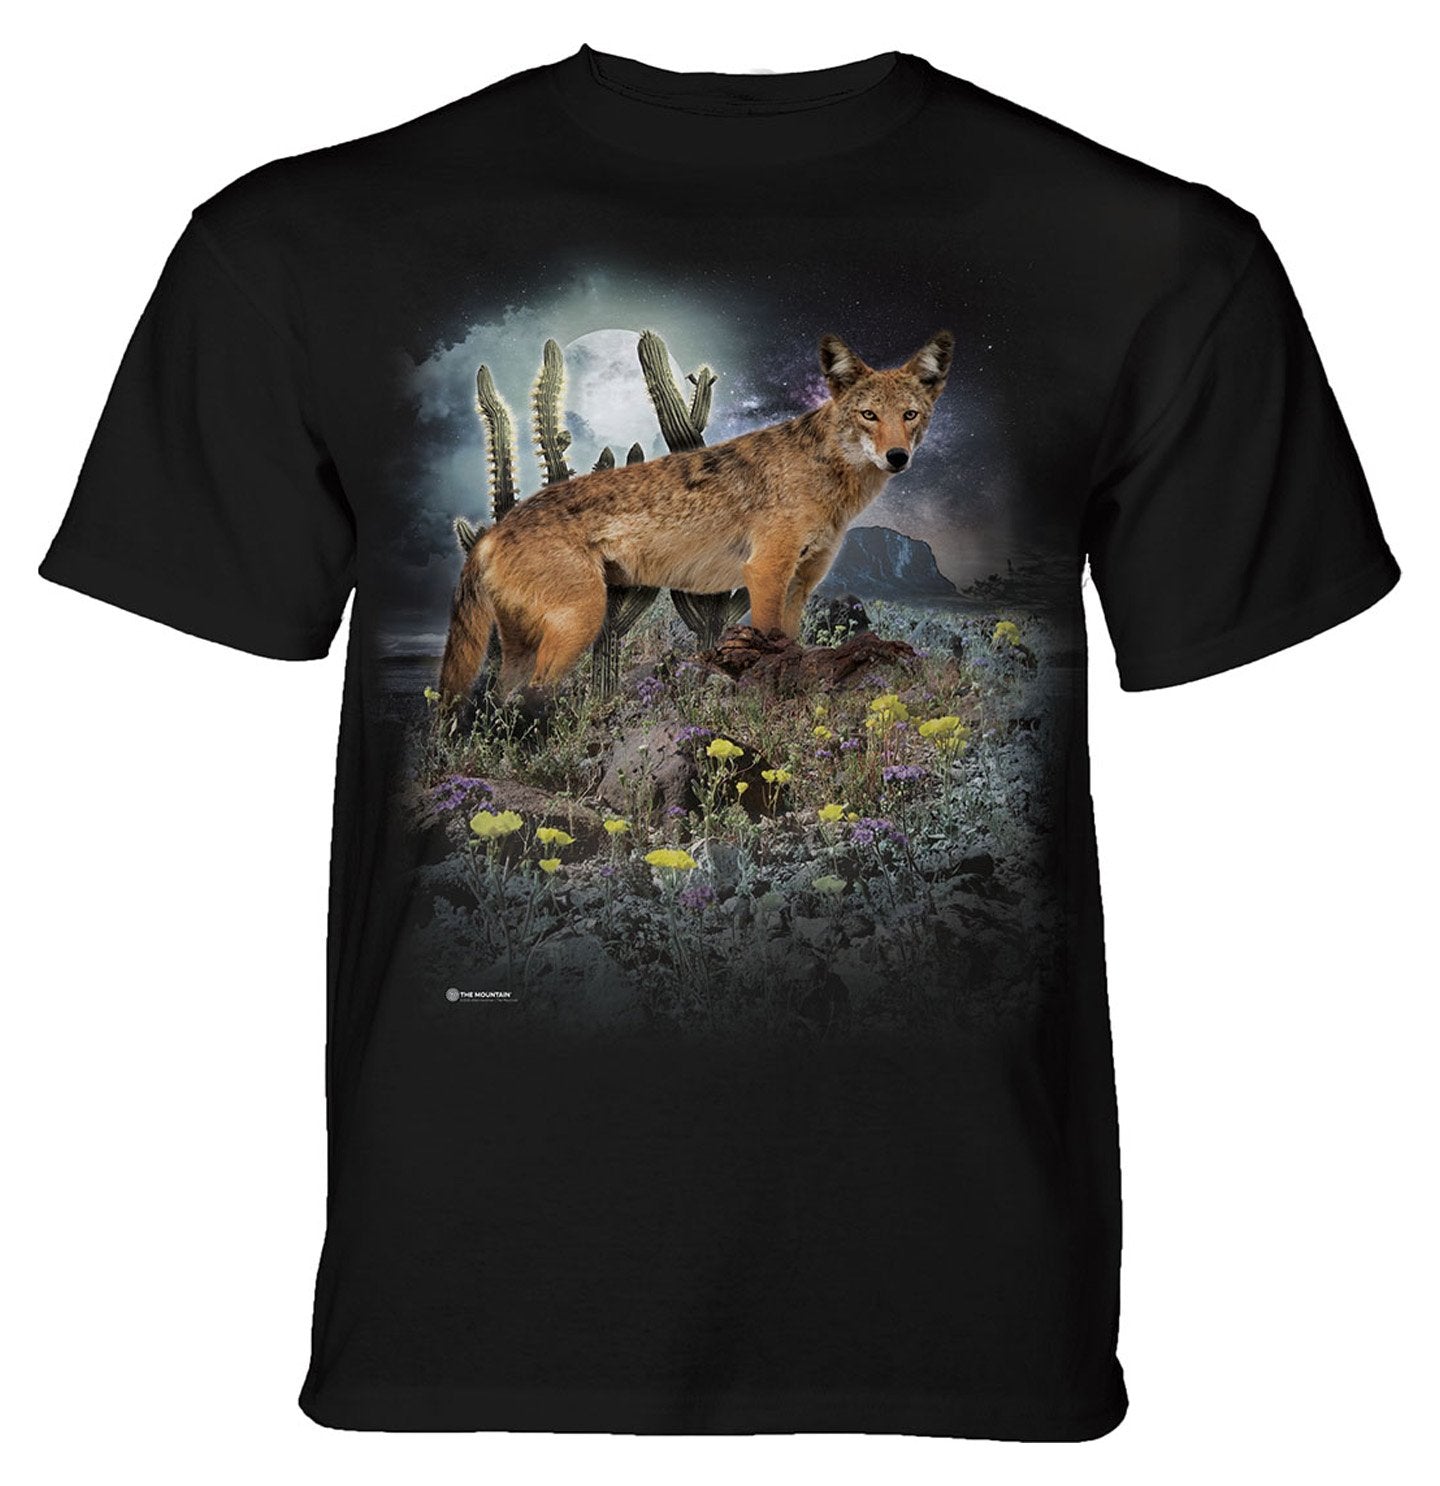 The Mountain - Desert Coyote - Adult Unisex T-Shirt